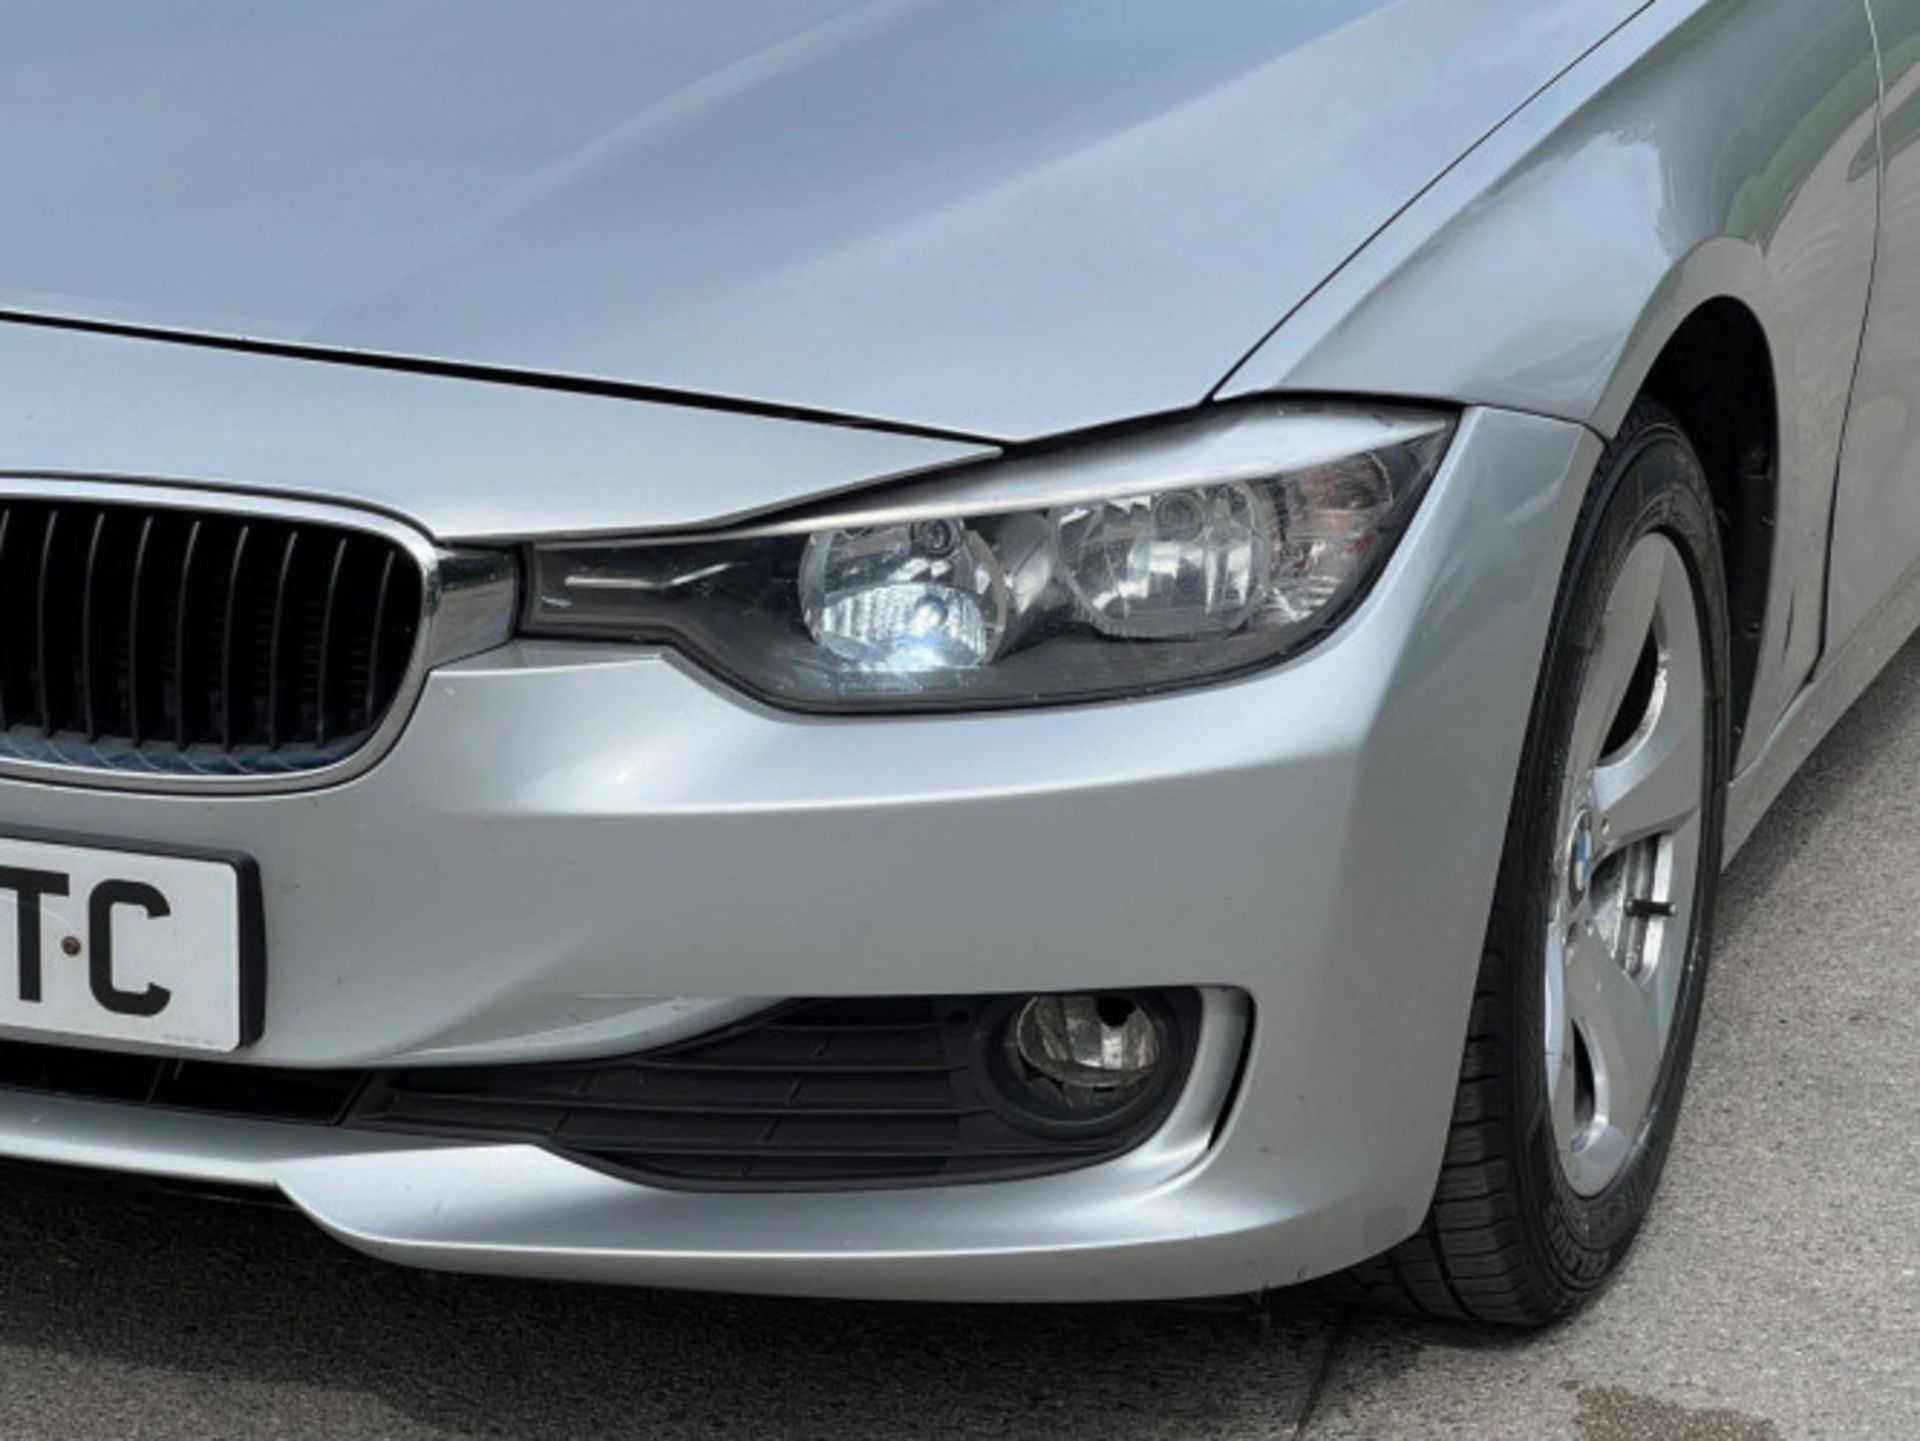 BMW 3 SERIES 2.0 DIESEL ED START STOP - A WELL-MAINTAINED GEM >>--NO VAT ON HAMMER--<< - Image 210 of 229